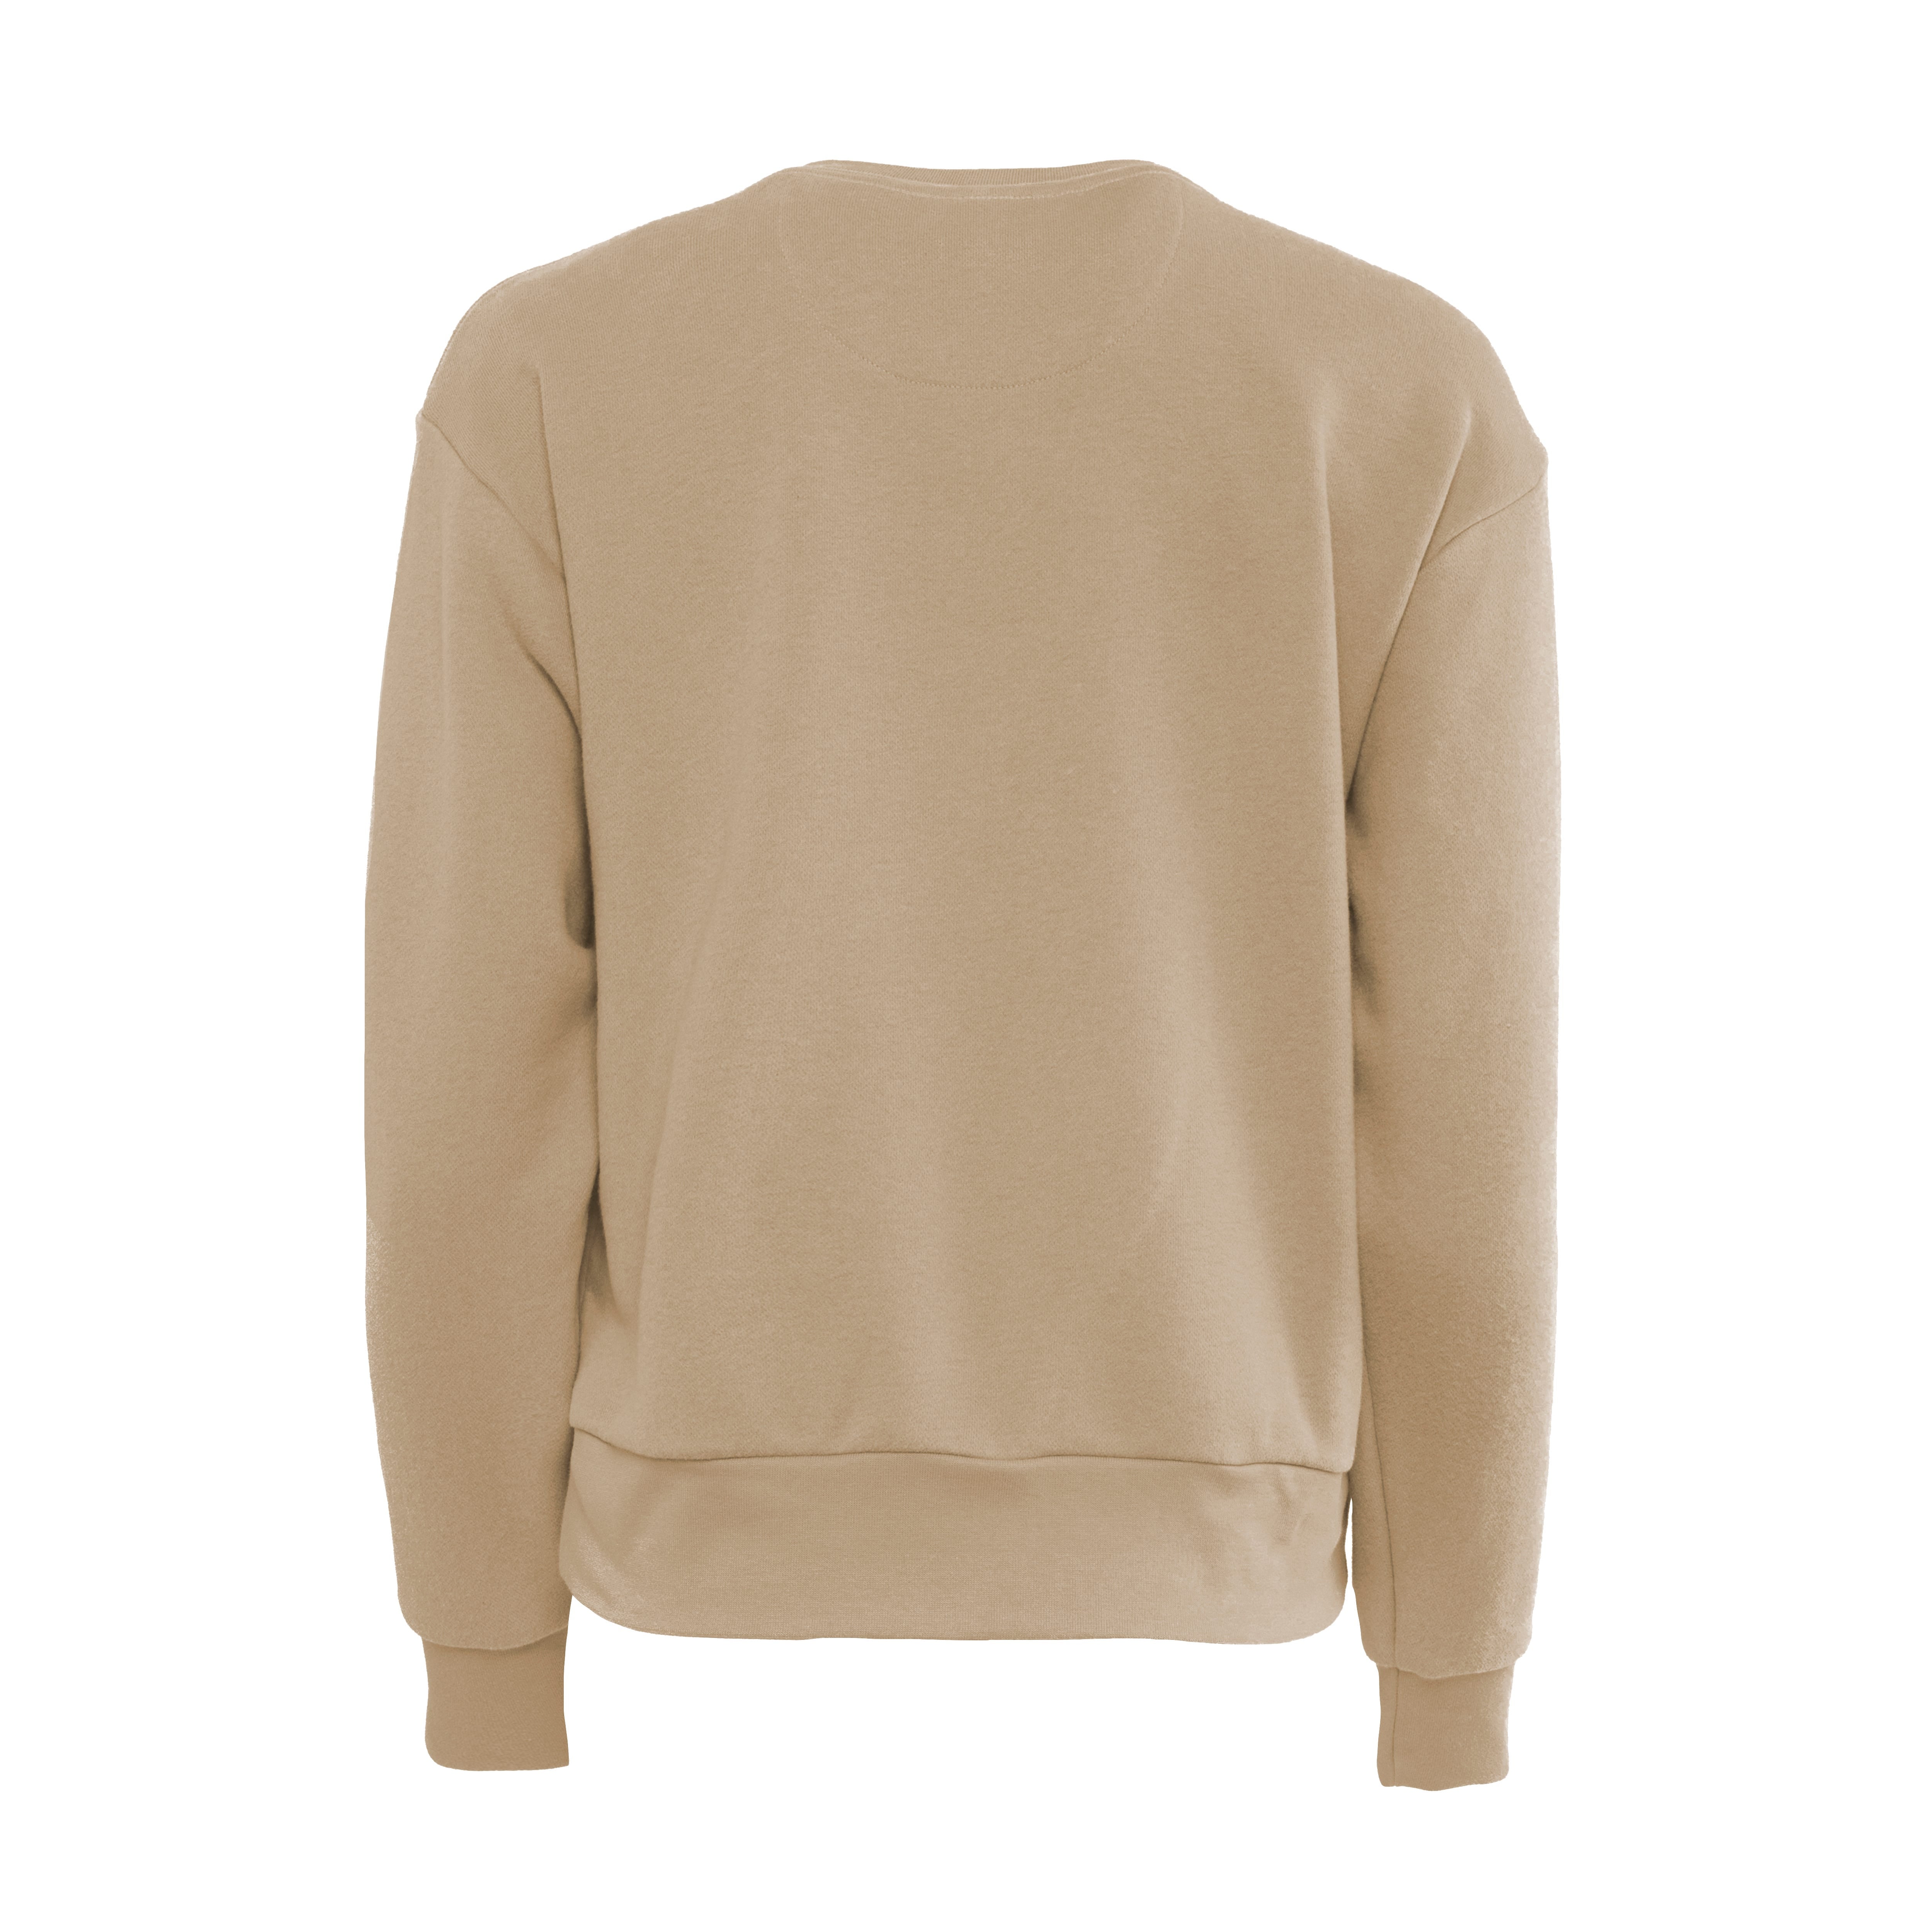 Women's sueded French Terry sweatshirt